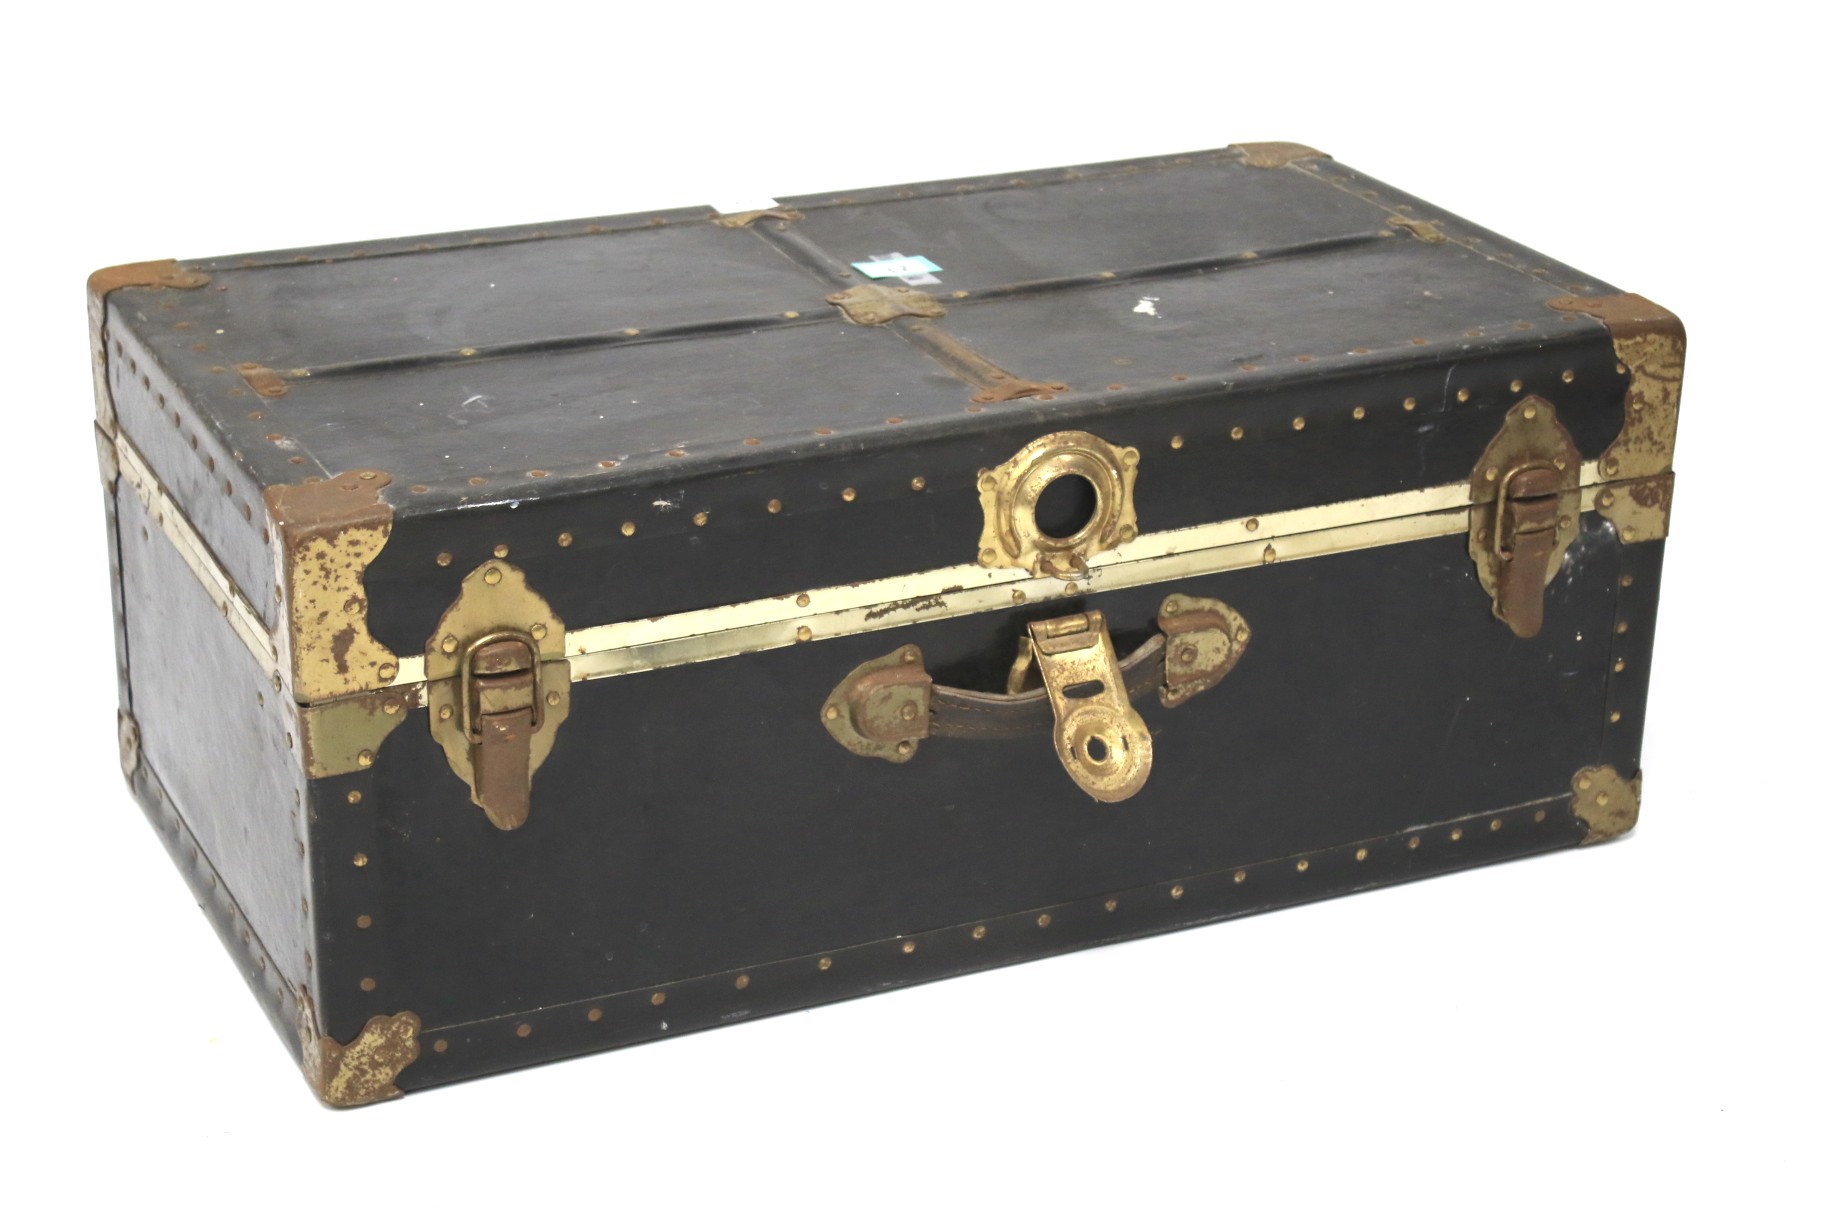 A leatherette and metal bound travelling trunk.